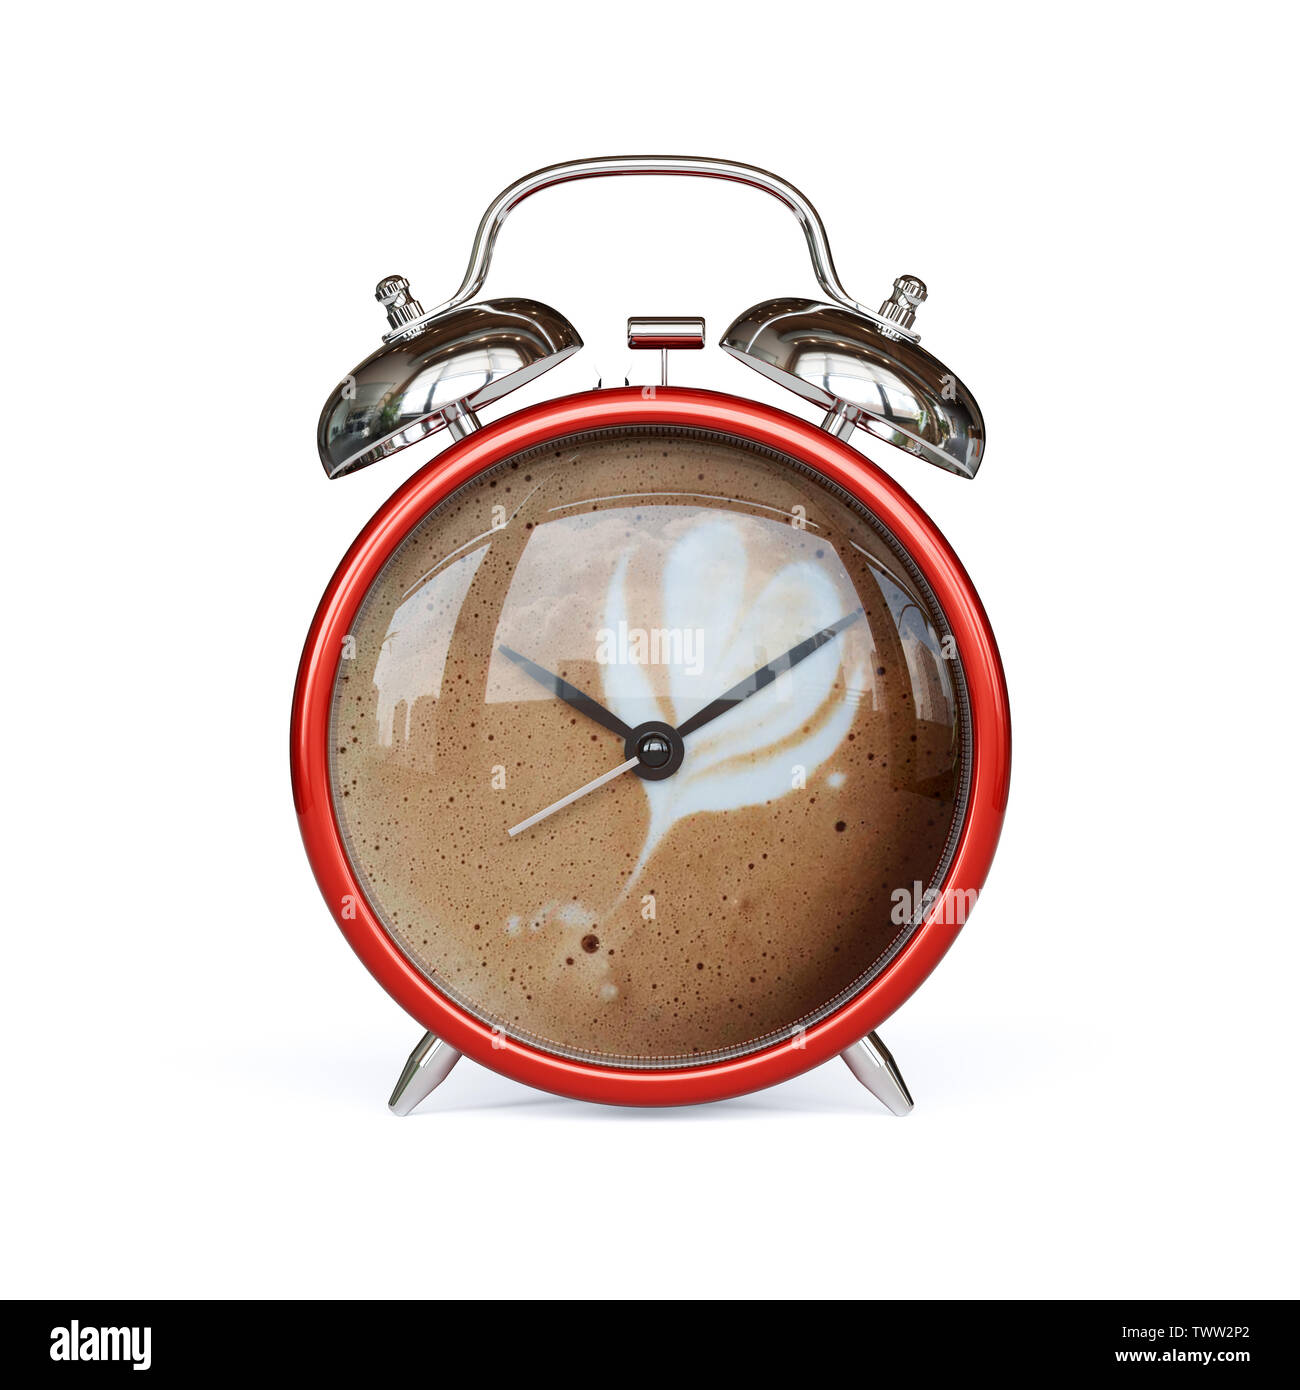 https://c8.alamy.com/comp/TWW2P2/cup-of-coffee-clock-face-red-alarm-clock-isolated-on-white-background-break-time-good-morning-cappuccino-design-time-concept-3d-rendering-illustra-TWW2P2.jpg